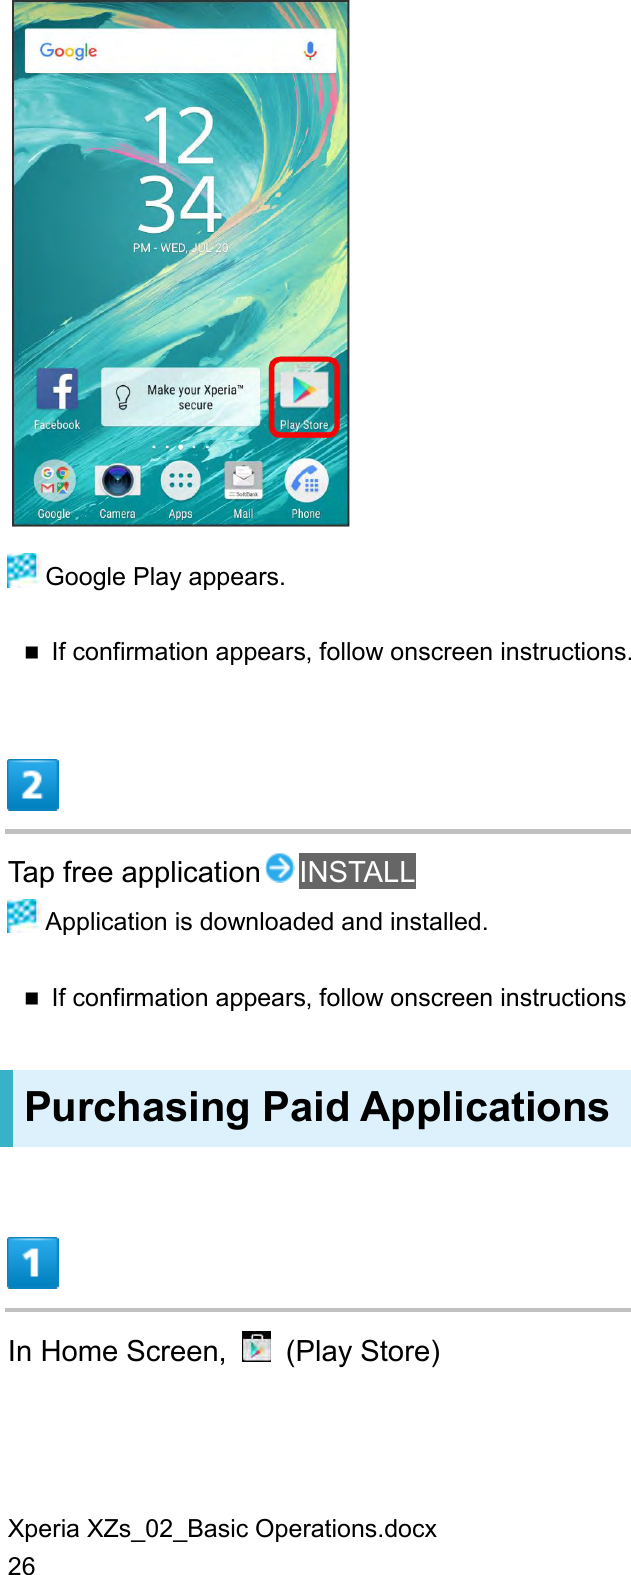 Xperia XZs_02_Basic Operations.docx 26   Google Play appears.  If confirmation appears, follow onscreen instructions.  Tap free application INSTALL  Application is downloaded and installed.  If confirmation appears, follow onscreen instructions Purchasing Paid Applications  In Home Screen,    (Play Store) 